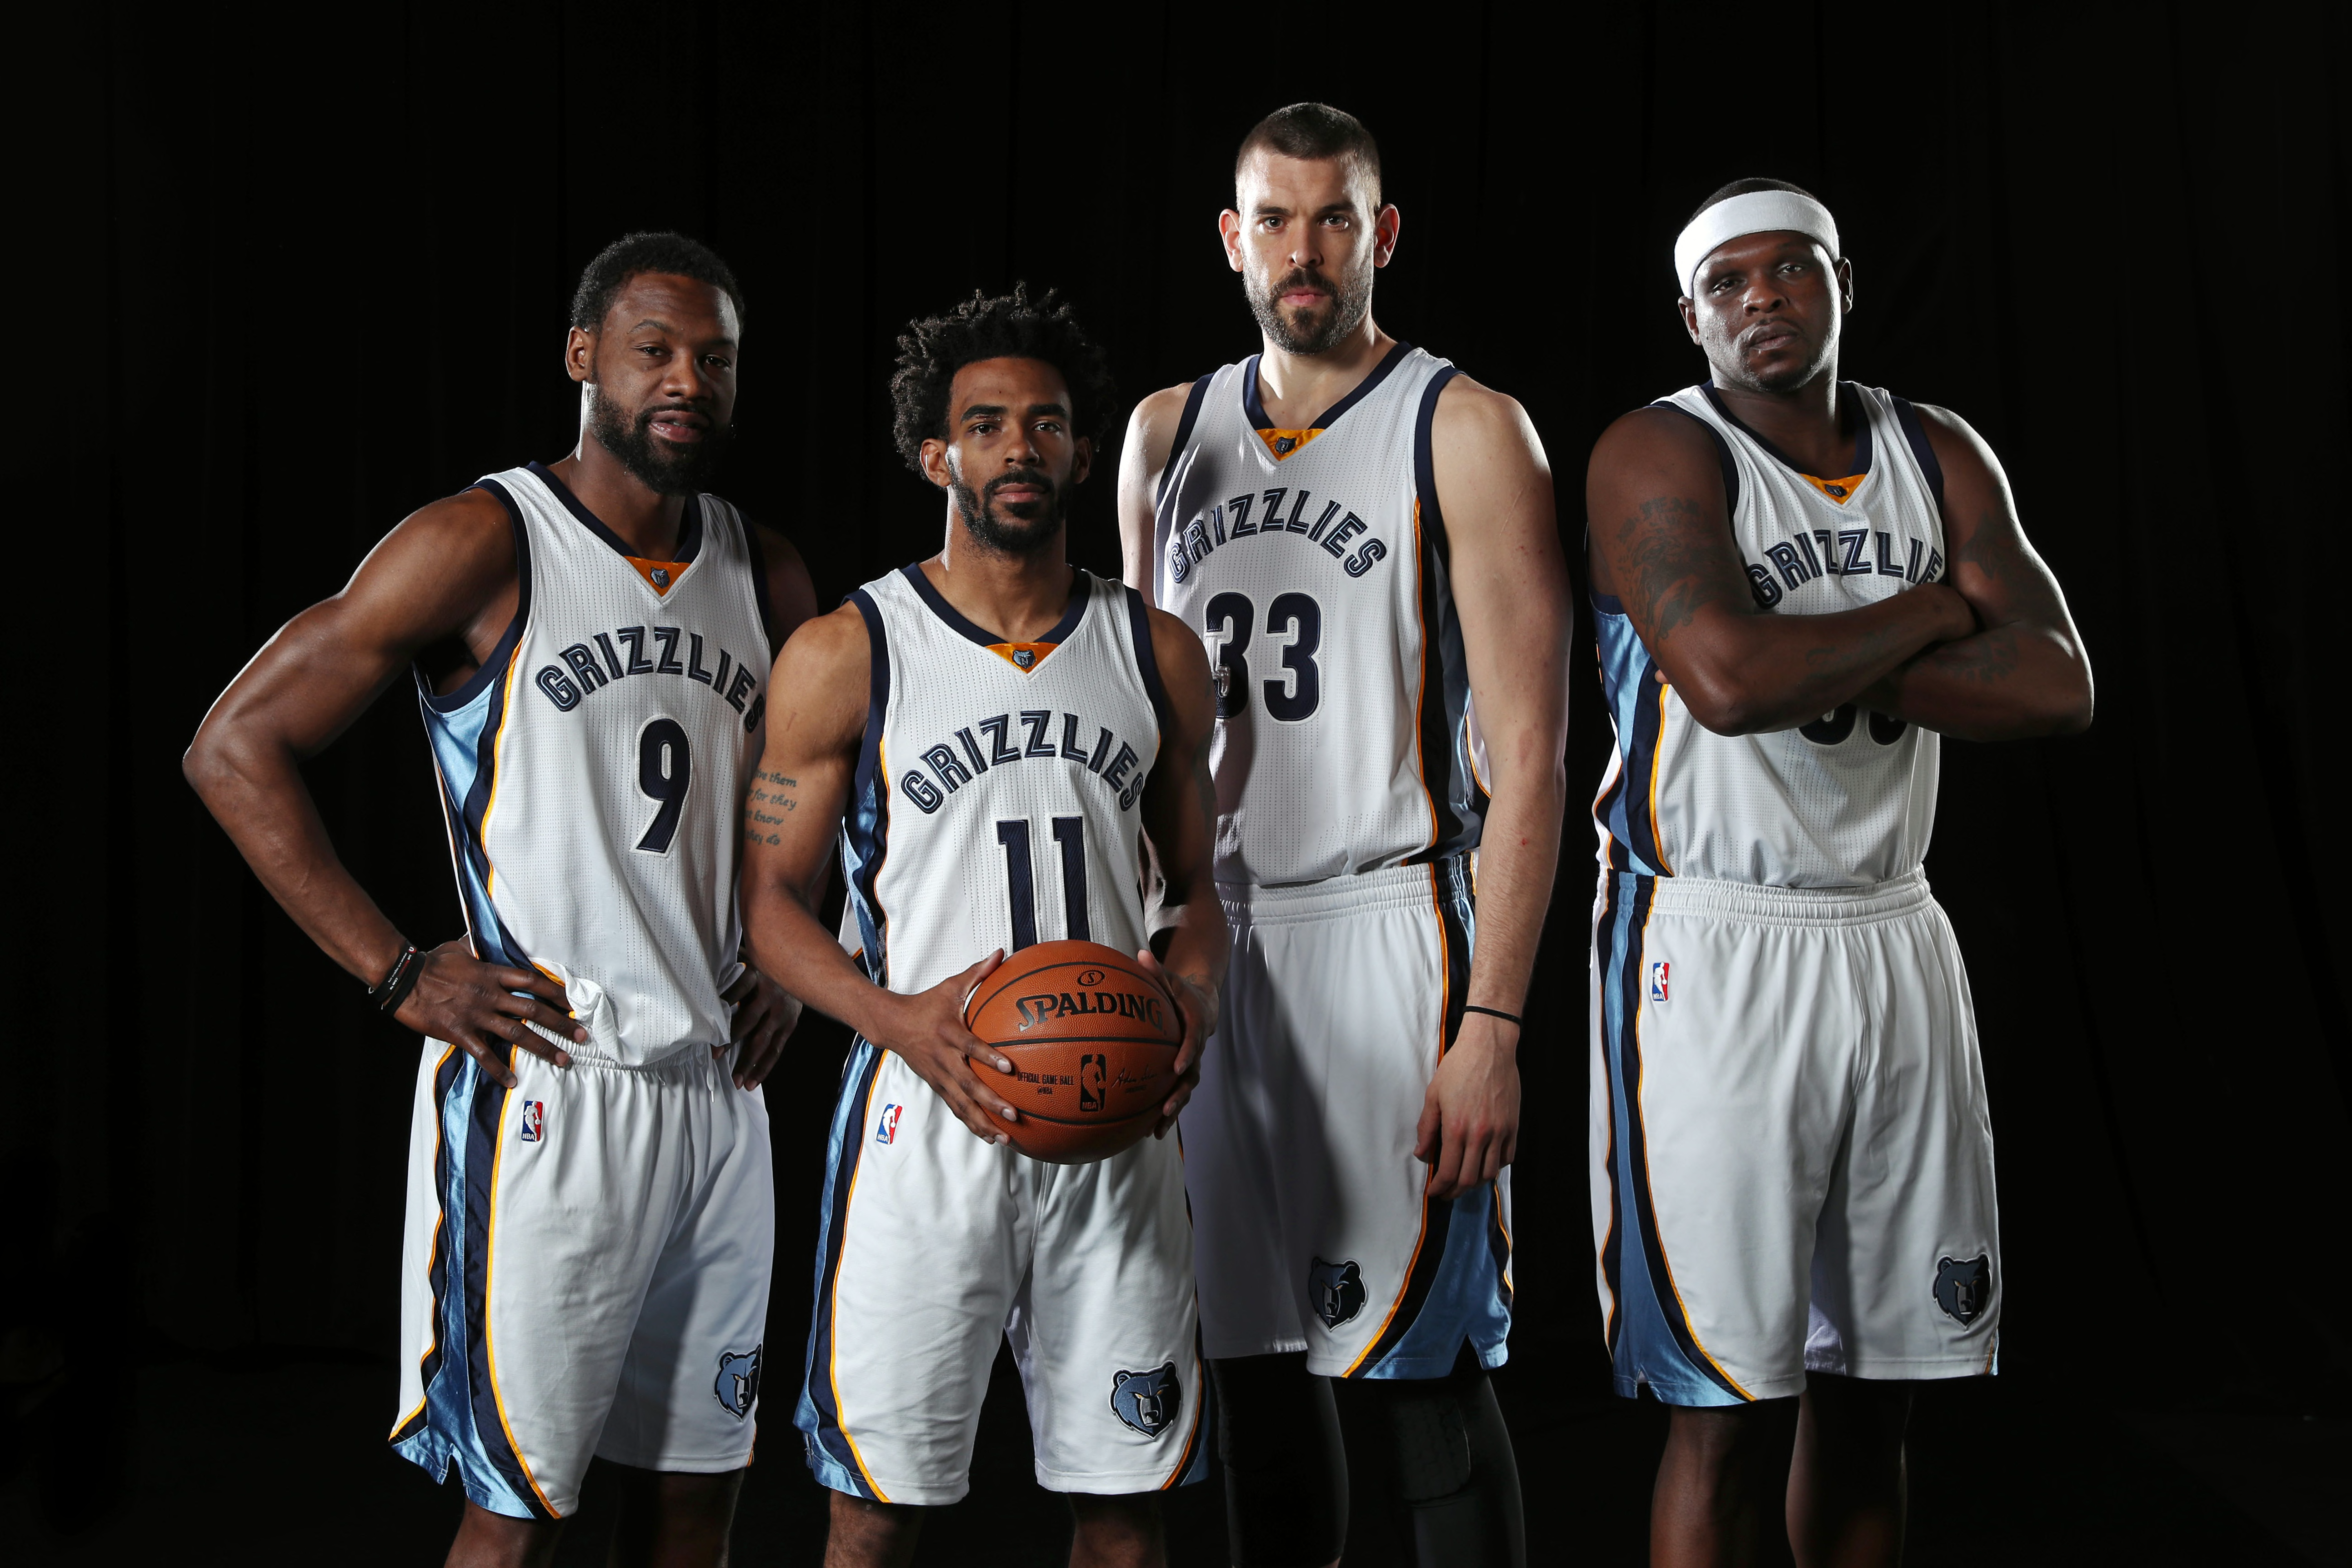 Behind the scenes of how the Grizzlies throwback uniform and